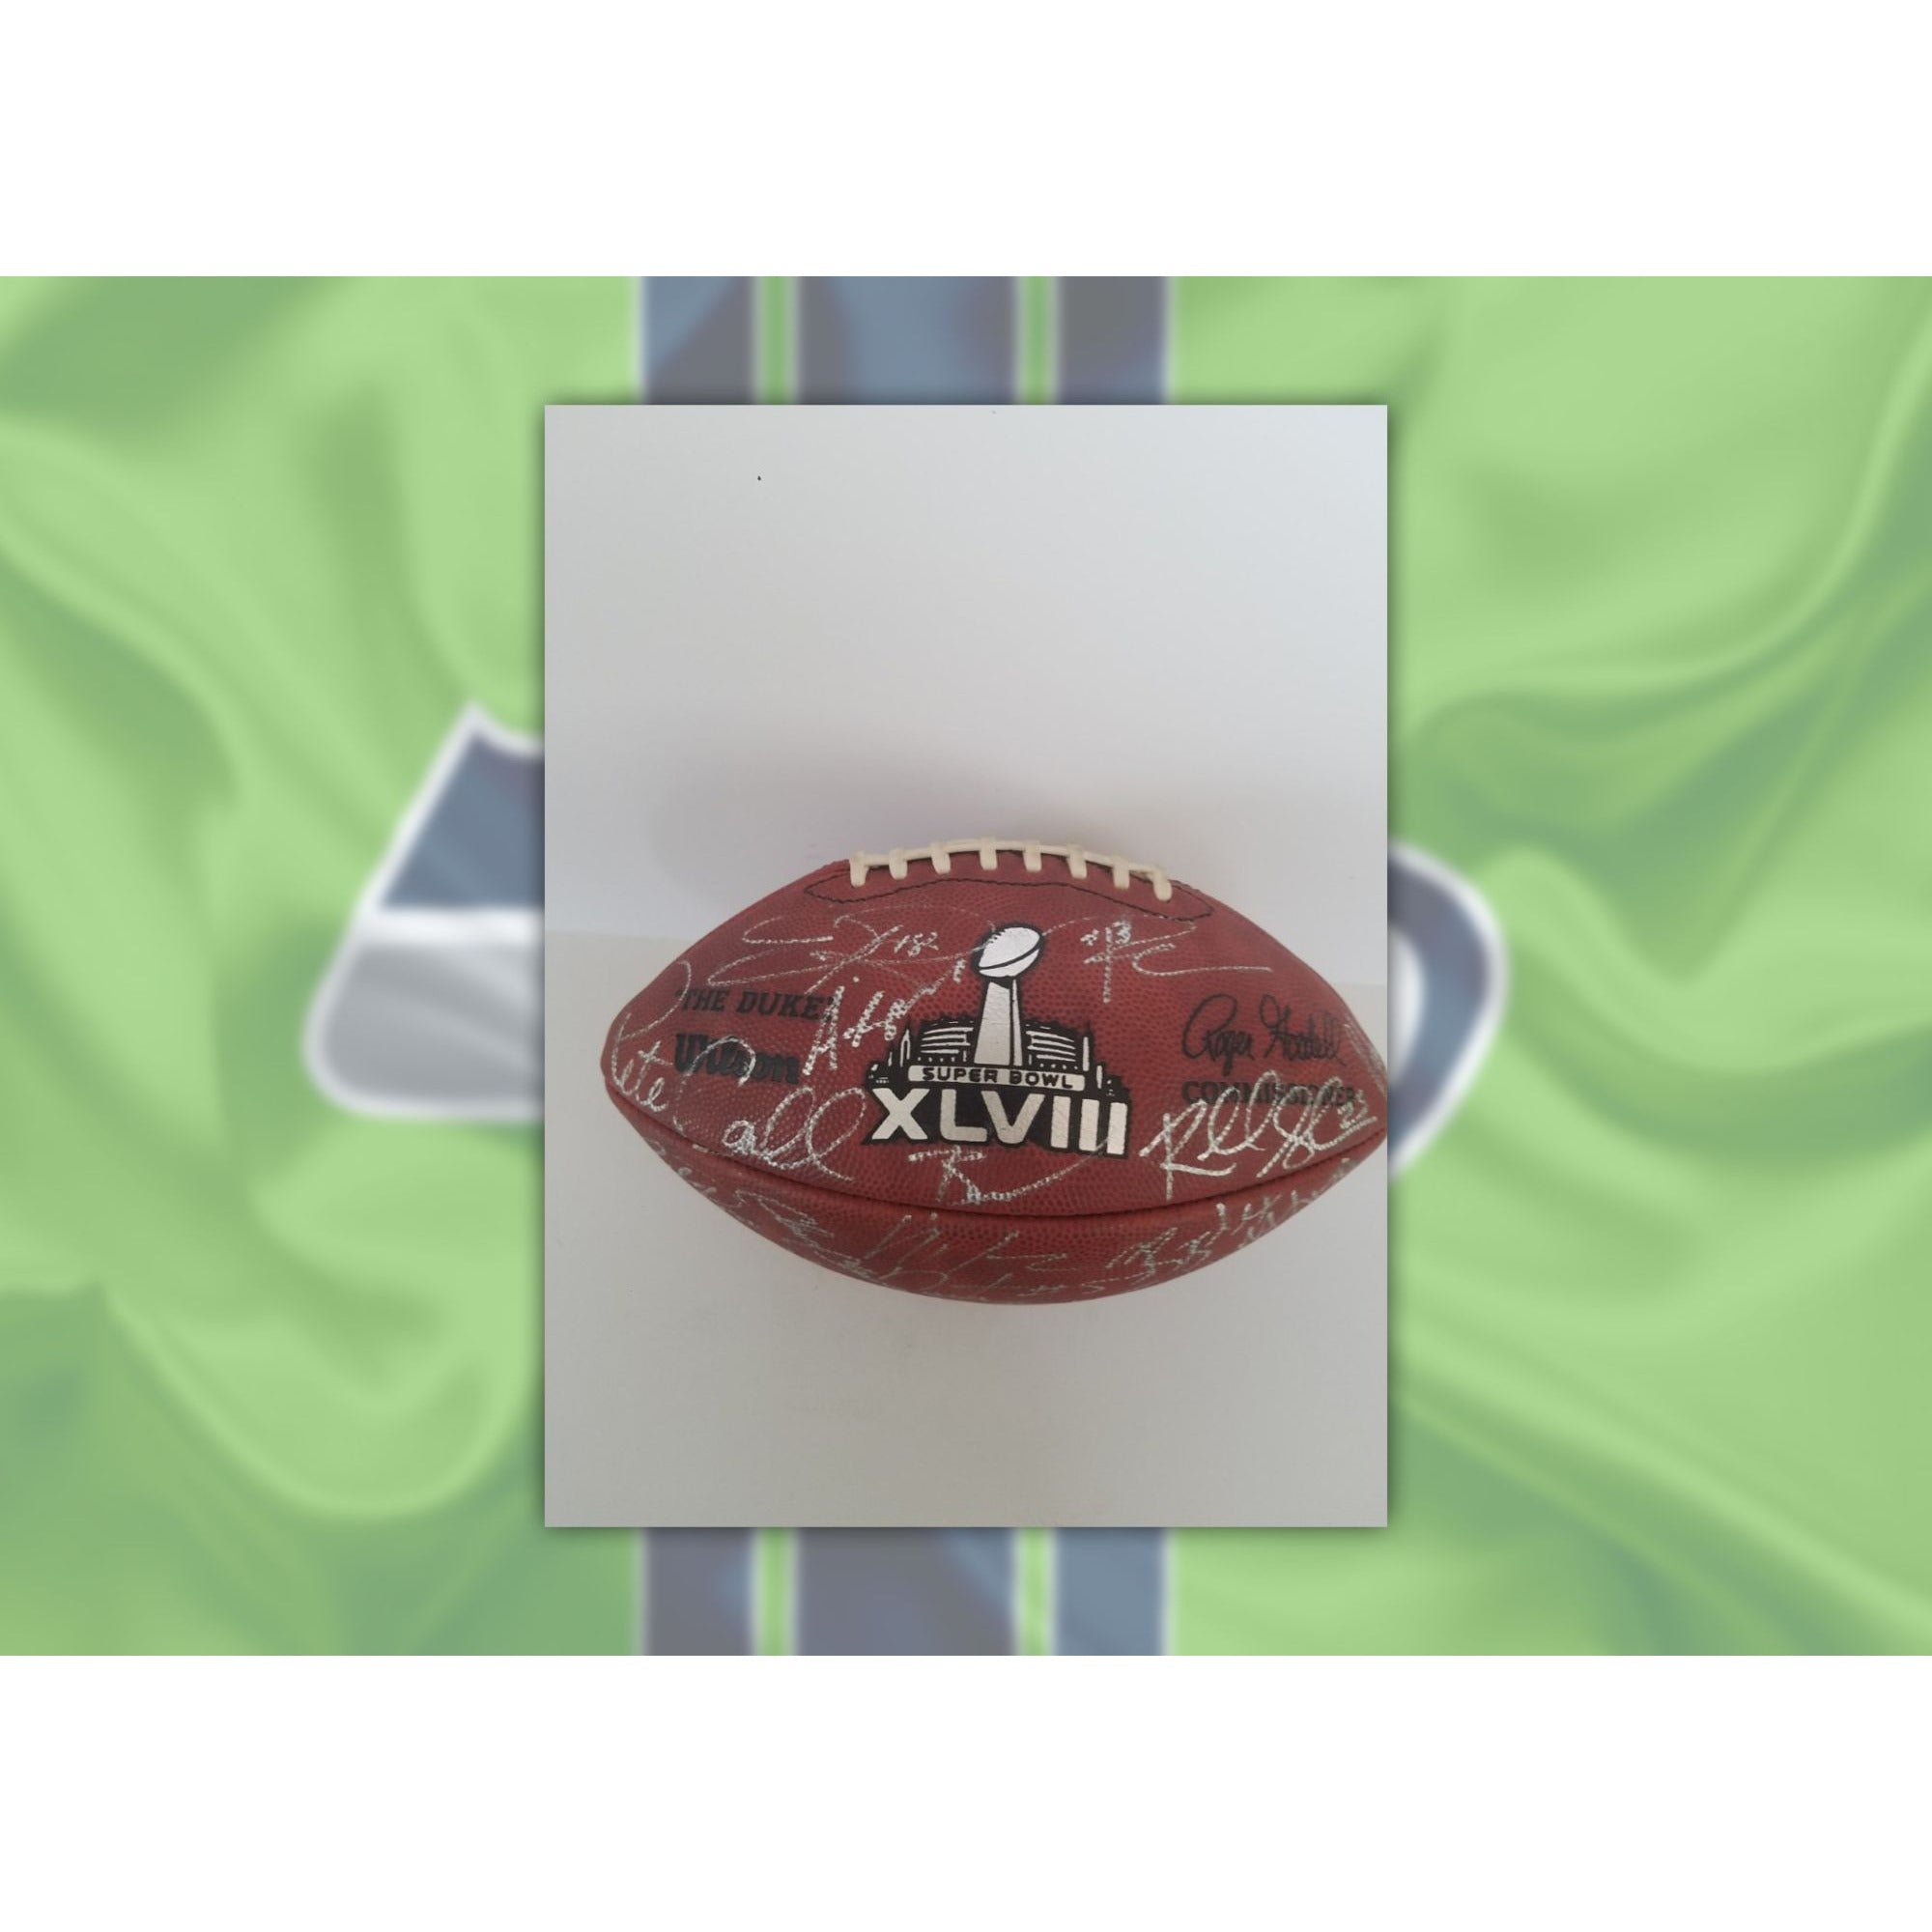 Russell Wilson, Marshawn Lynch, Pete Carroll, Seattle Seahawks 2014 Super Bowl champions team signed football with proof with free case